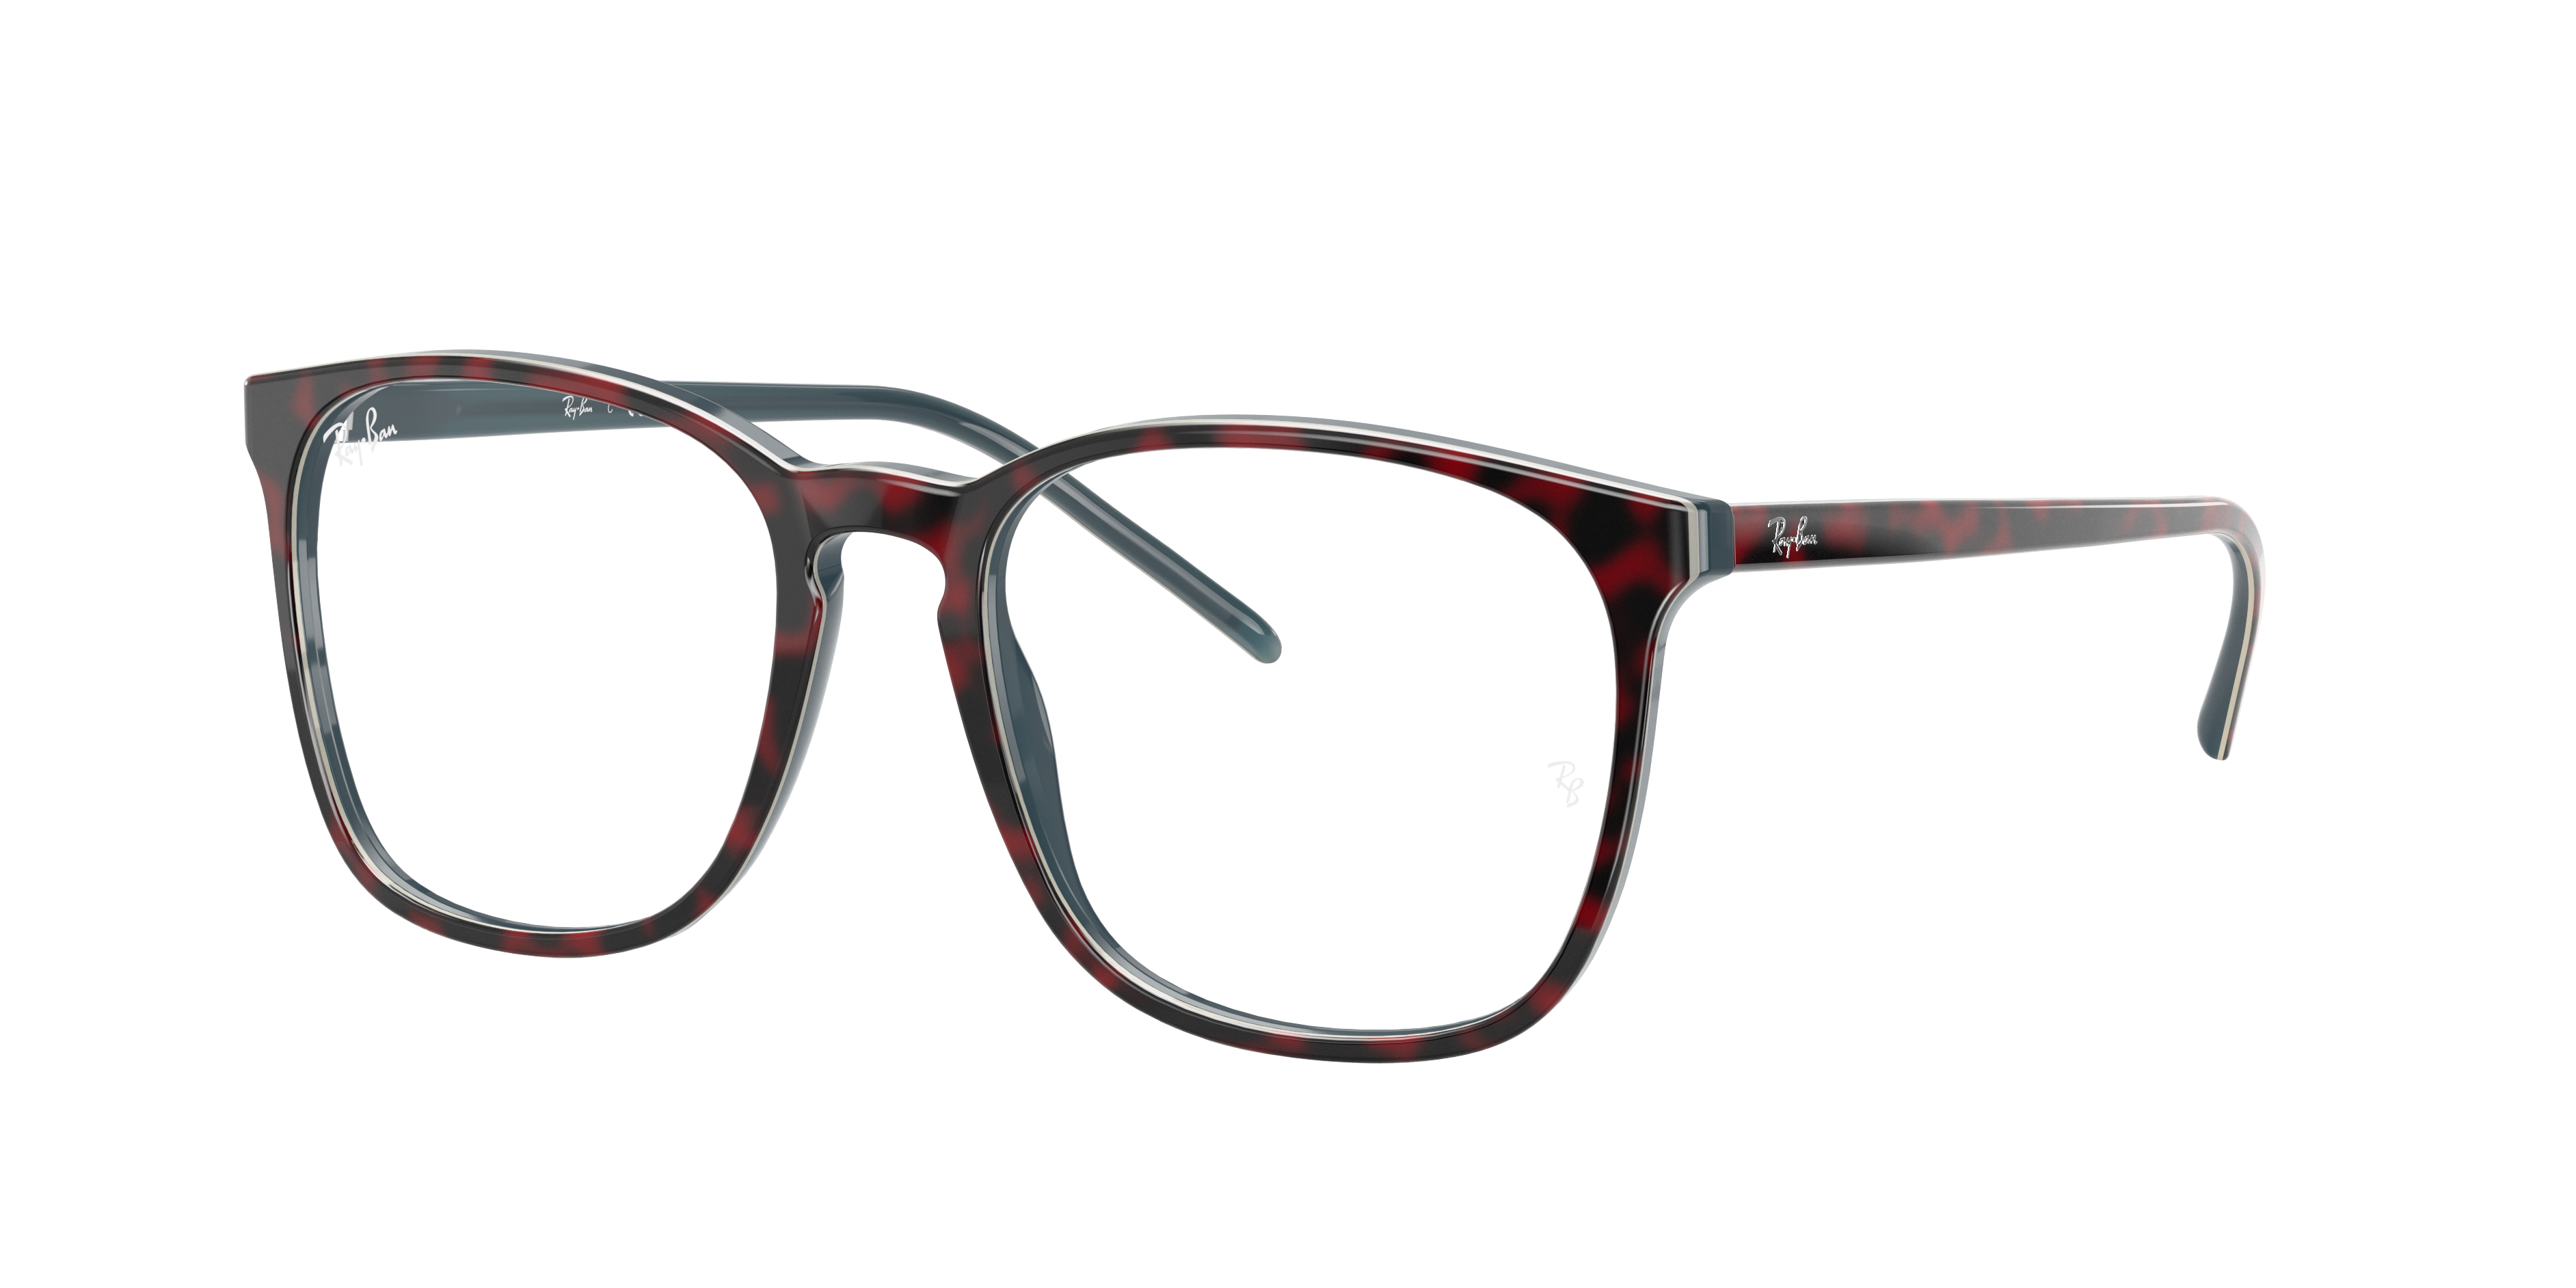 ray ban red frame sunglasses